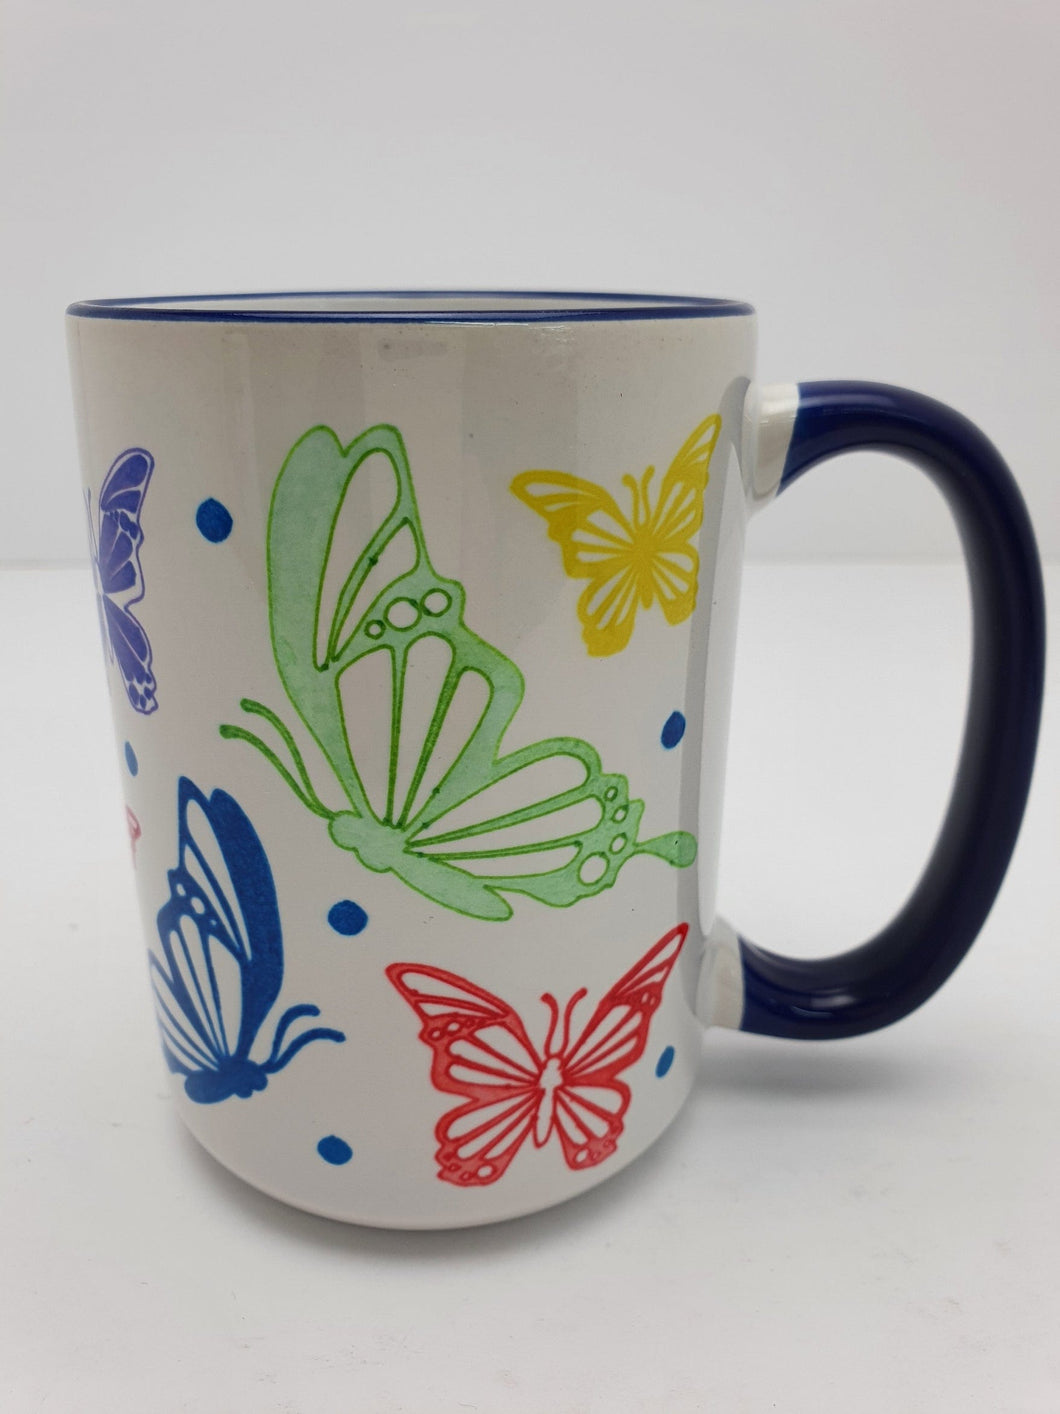 Tea Coffee Mug Ideal Gift Hand Printed Butterfly Design 15oz Blue Handle and Rim Butterfly Mug Harbourside Gifts